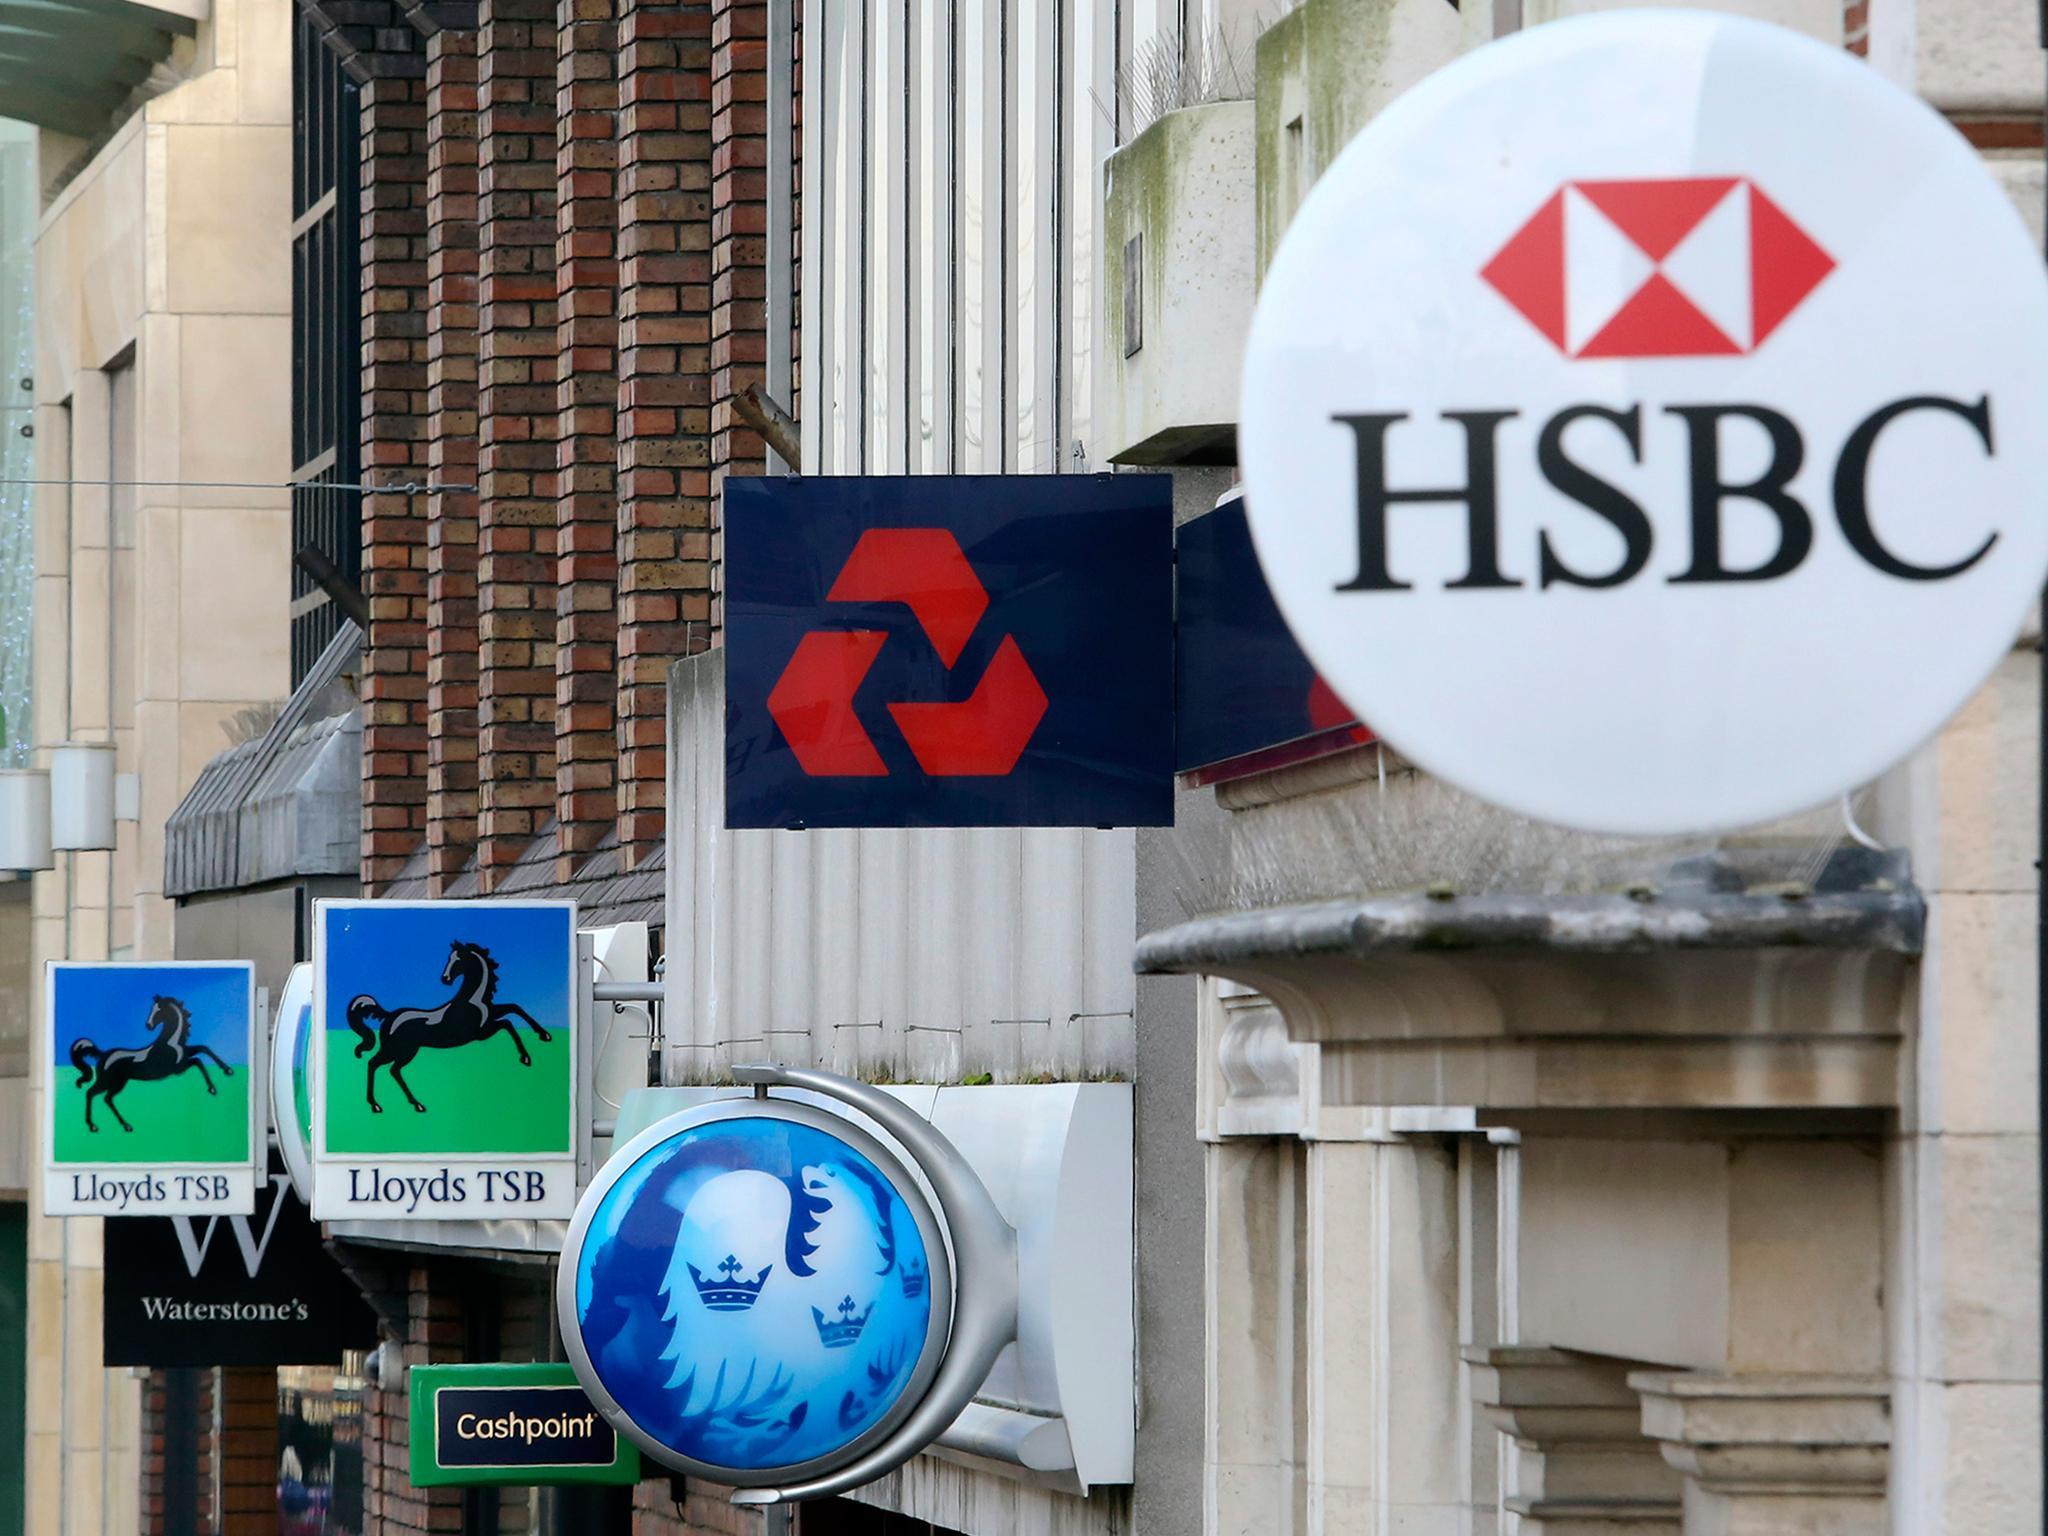 HSBC currently employs around 48,000 people in the UK